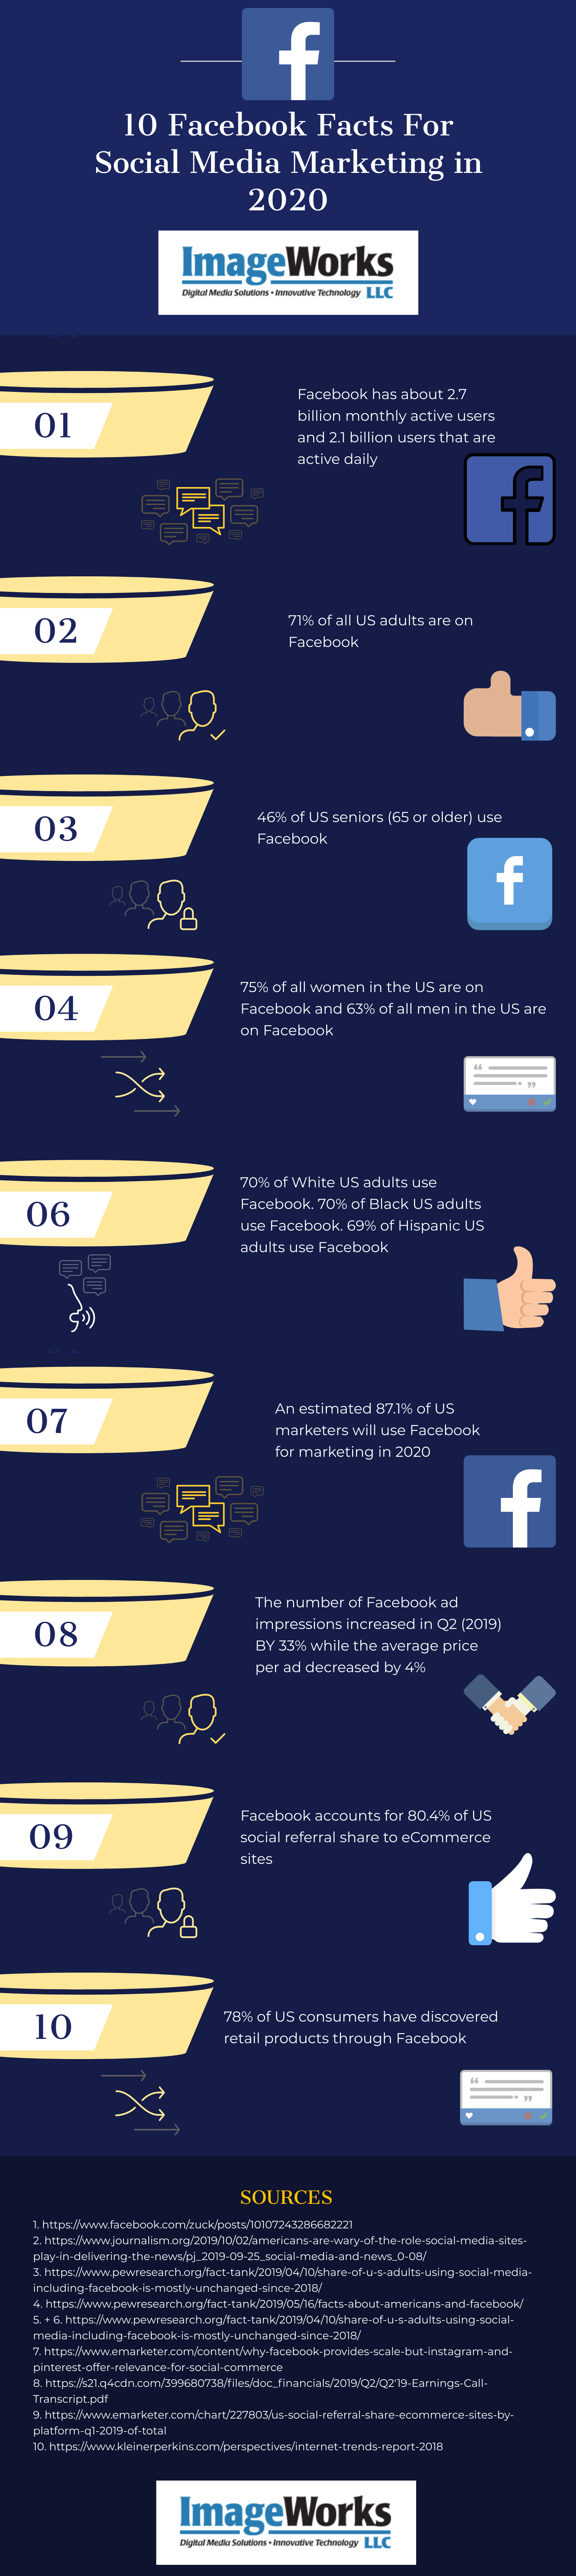 10-facebook-facts cropped